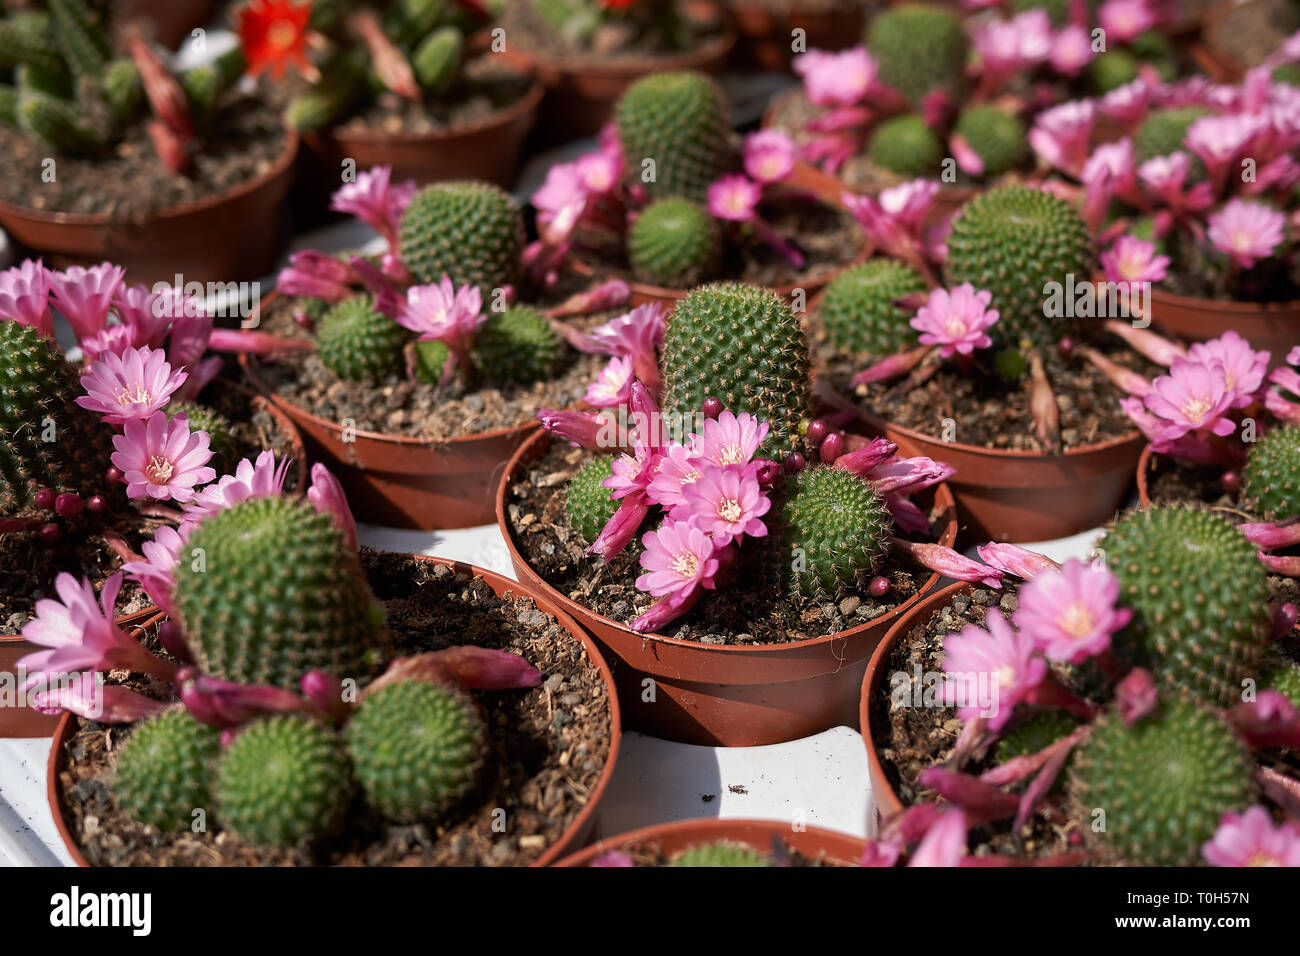 cactus in a flower market Stock Photo